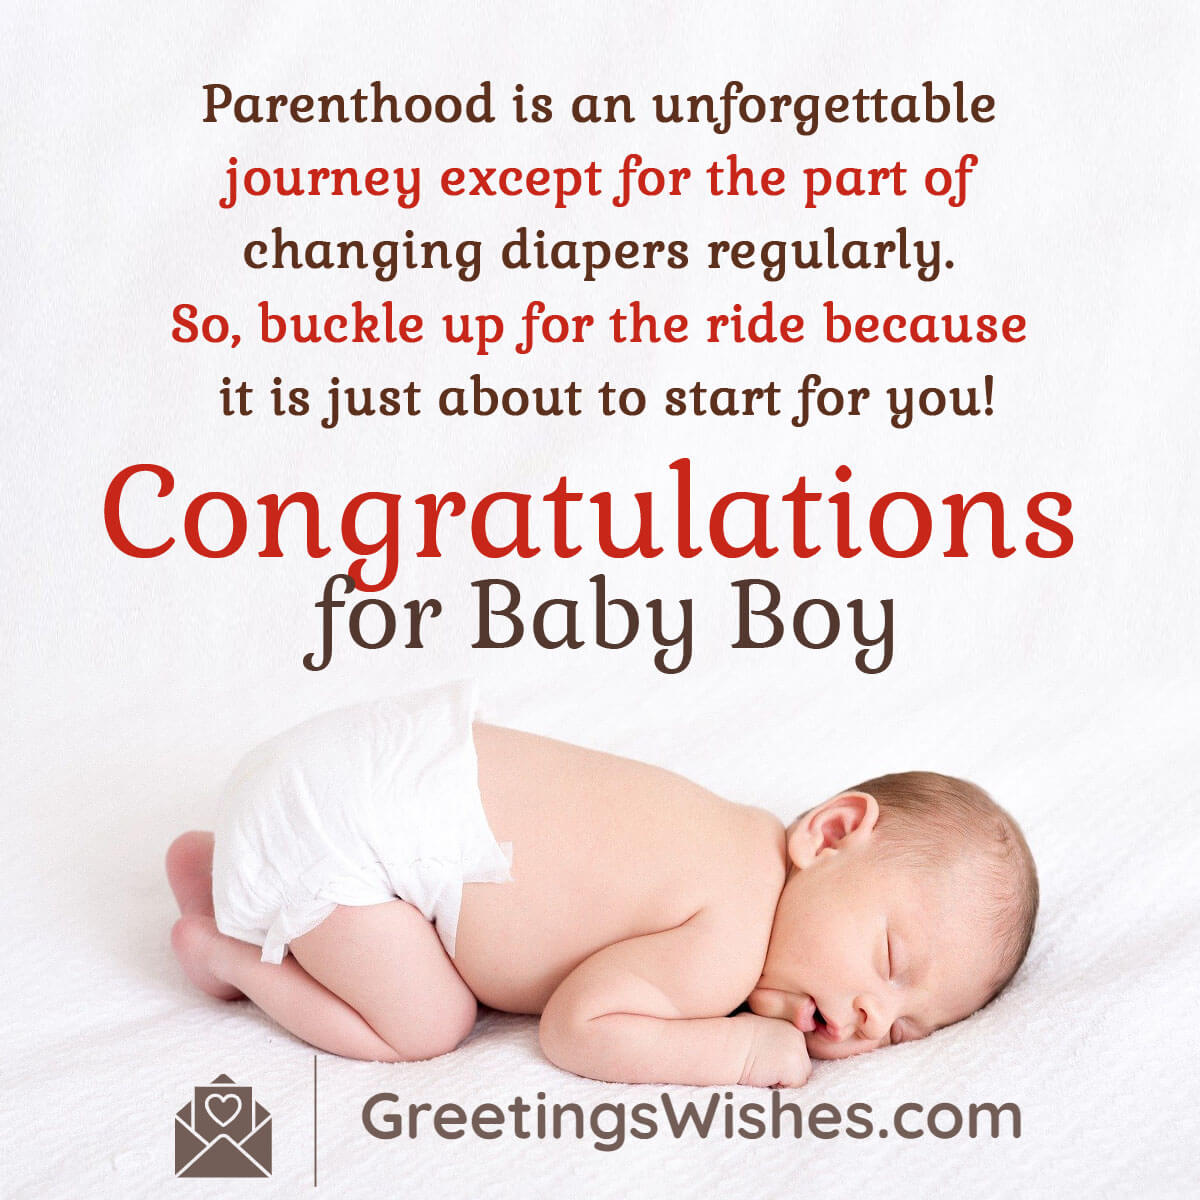 Congratulations Baby Boy - Greetings Wishes